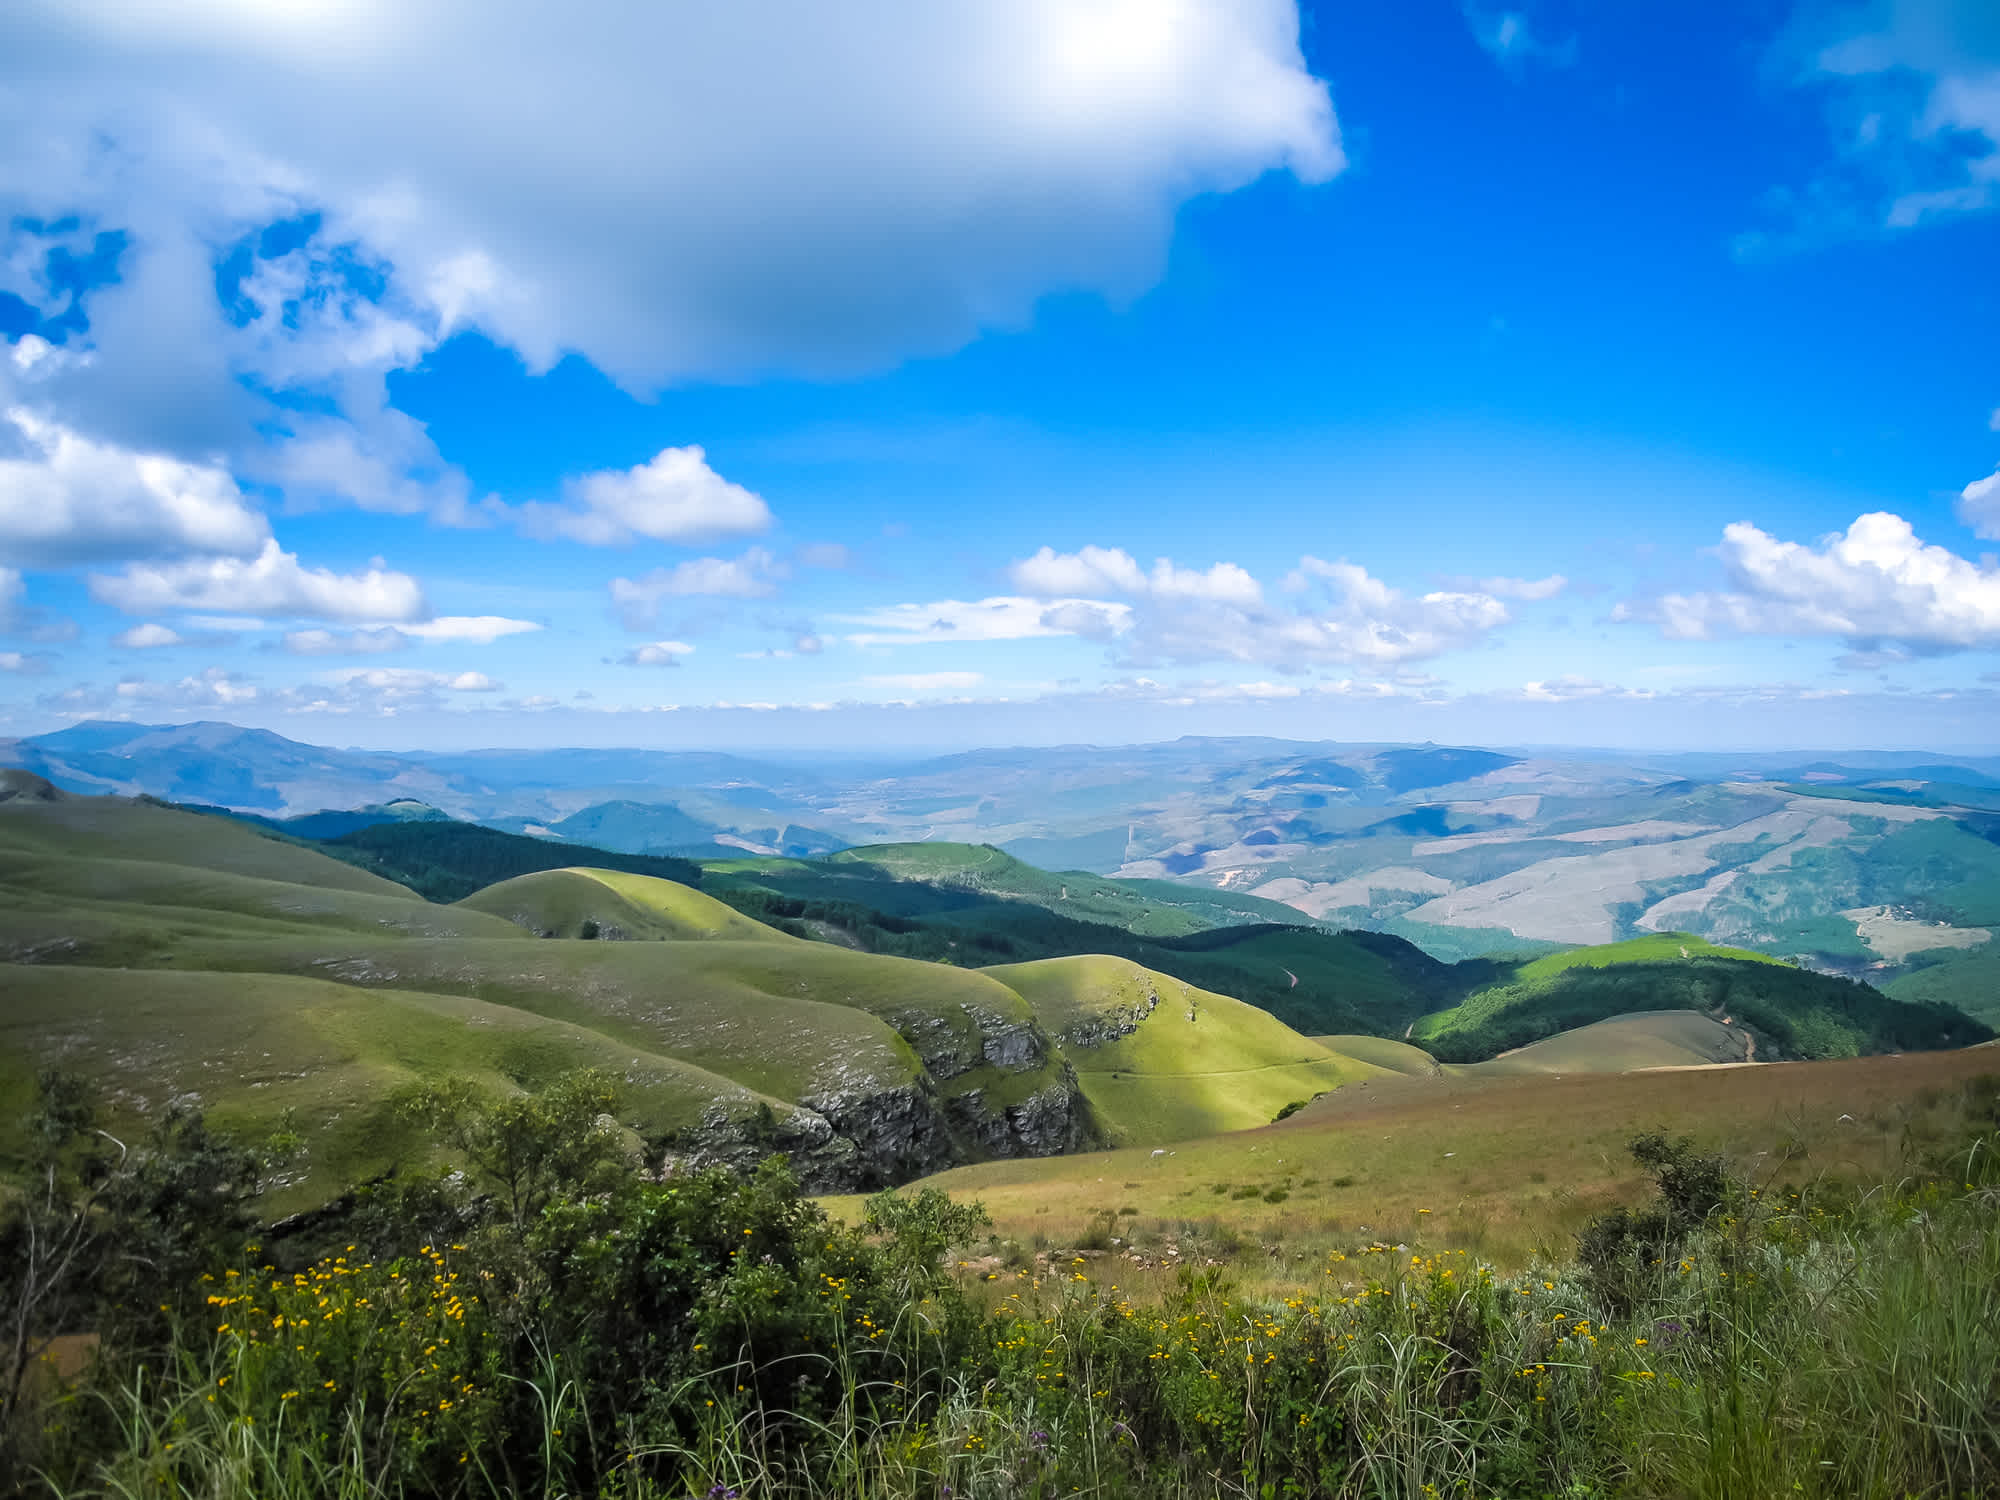 Hills of Hazyview in Mpumalanga, South Africa.